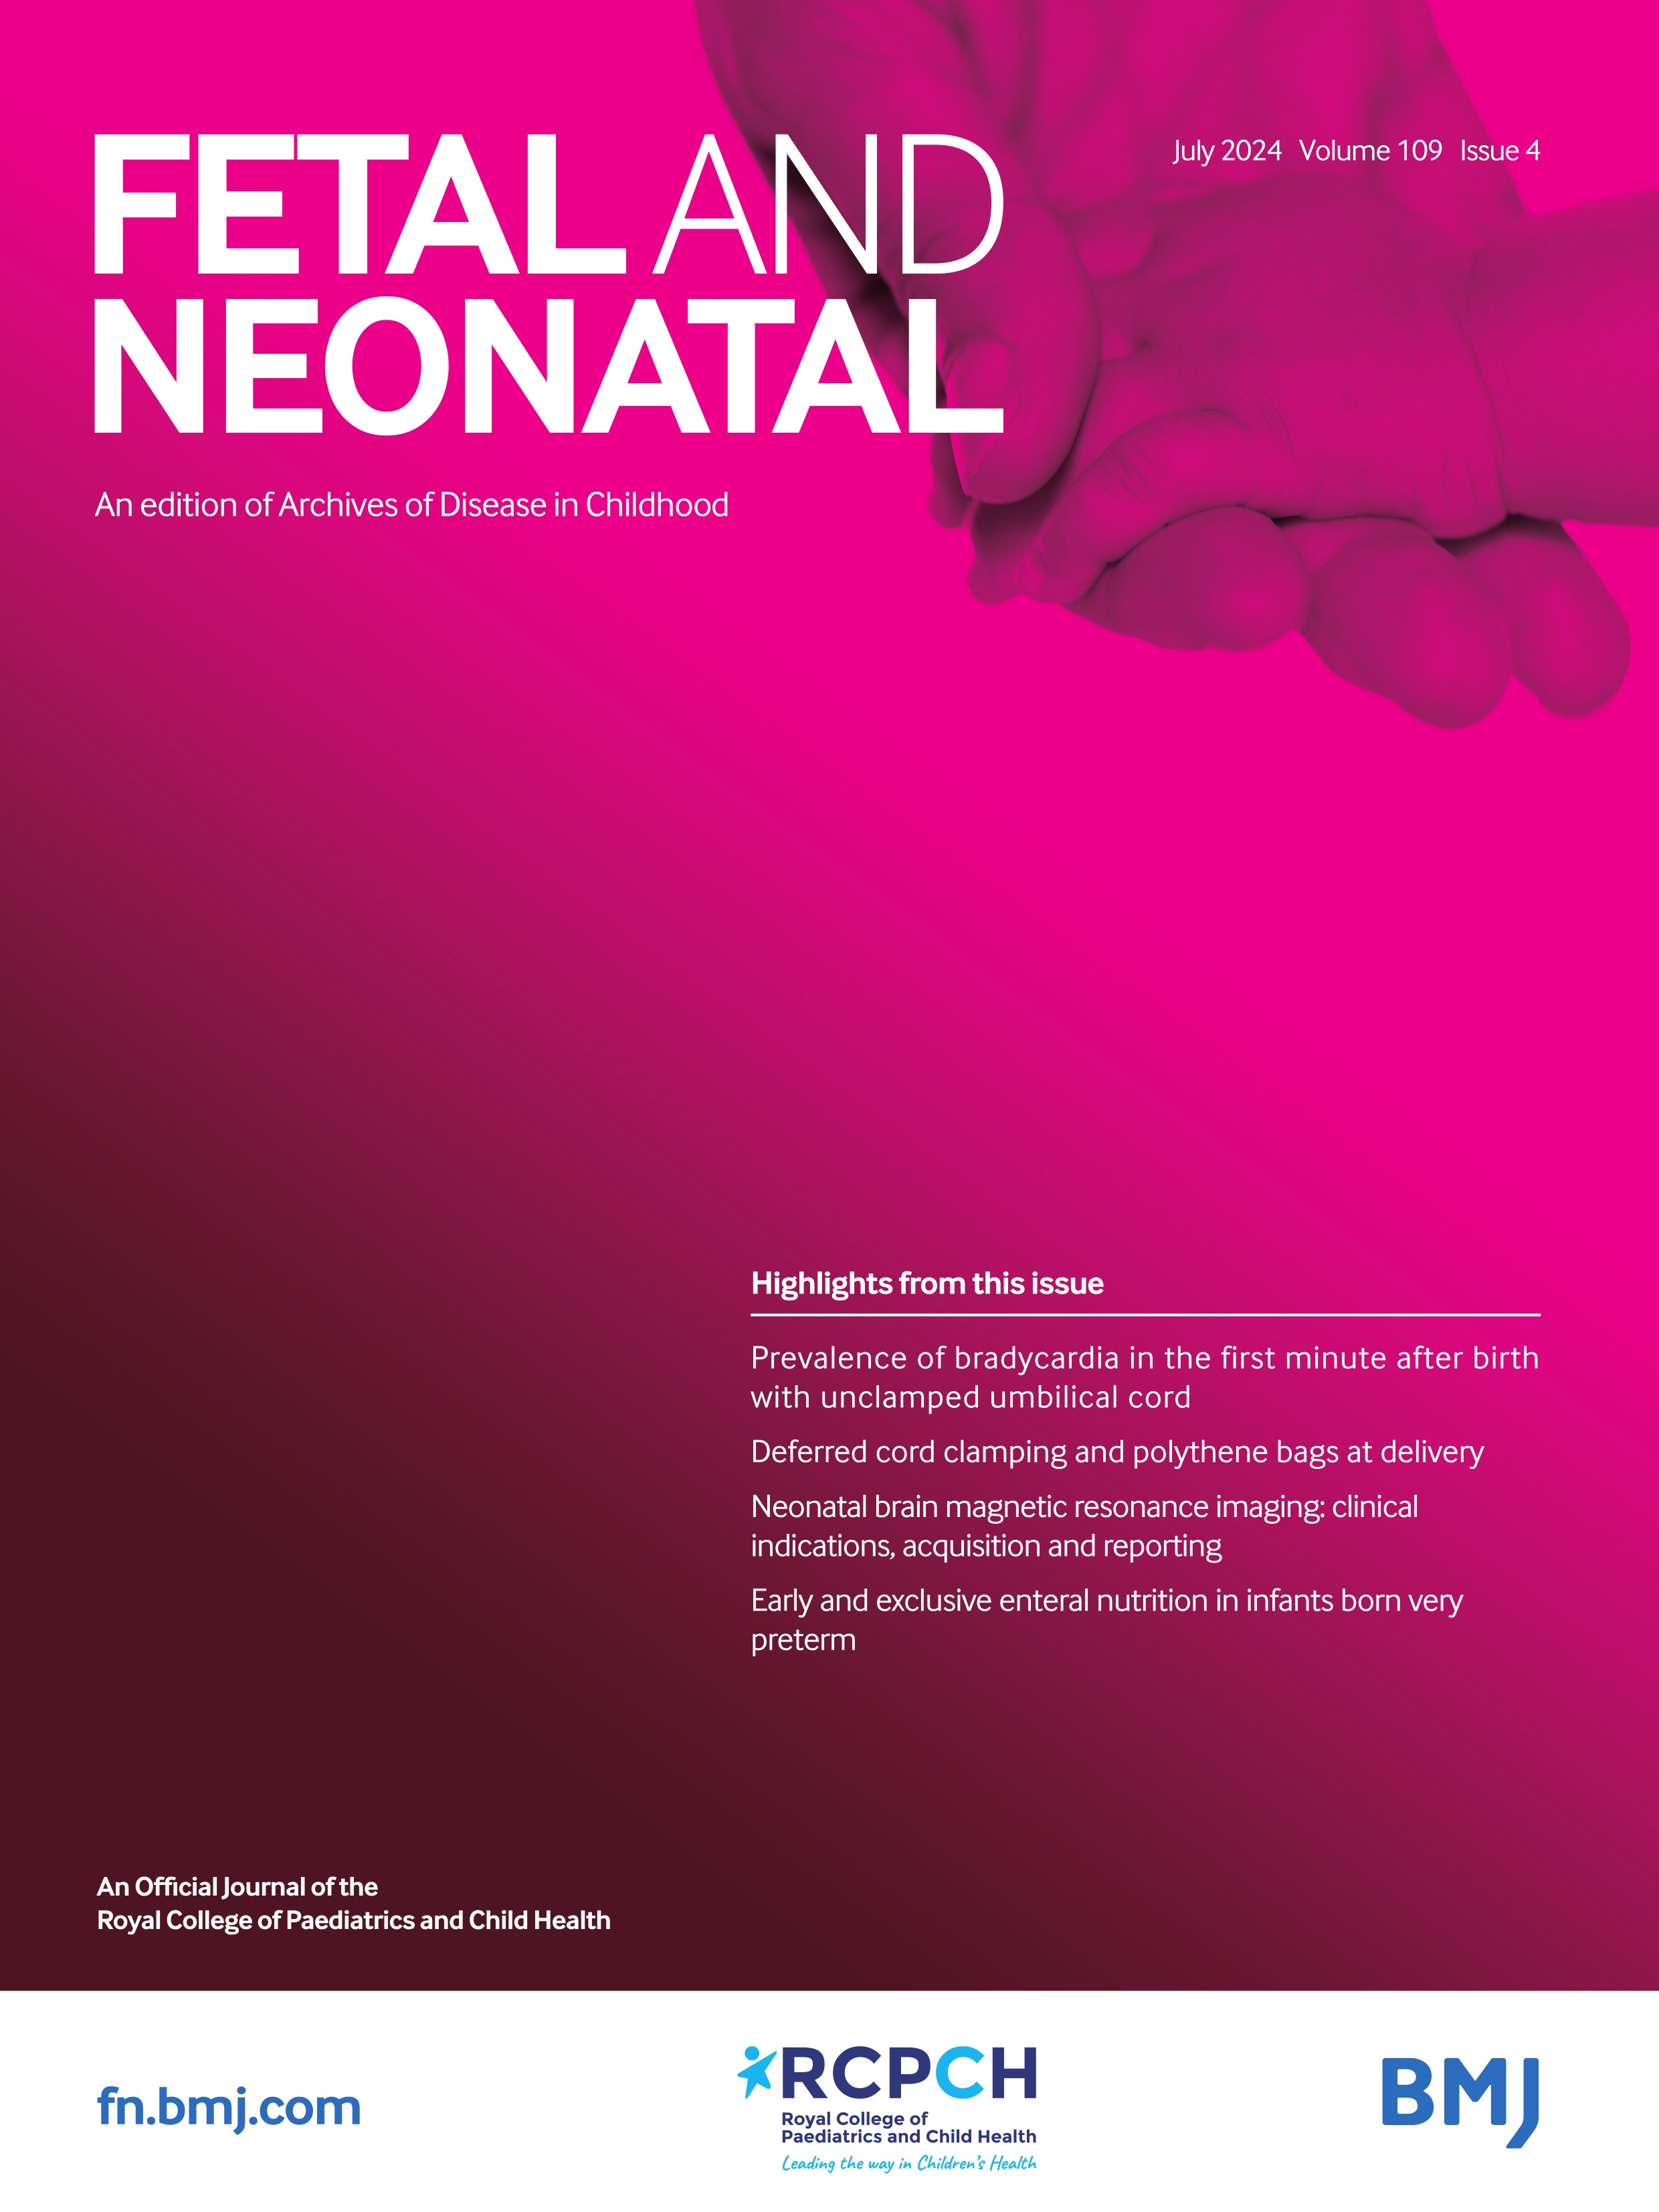 Continuous non-invasive measurement of cardiac output in neonatal intensive care using regional impedance cardiography: a prospective observational study